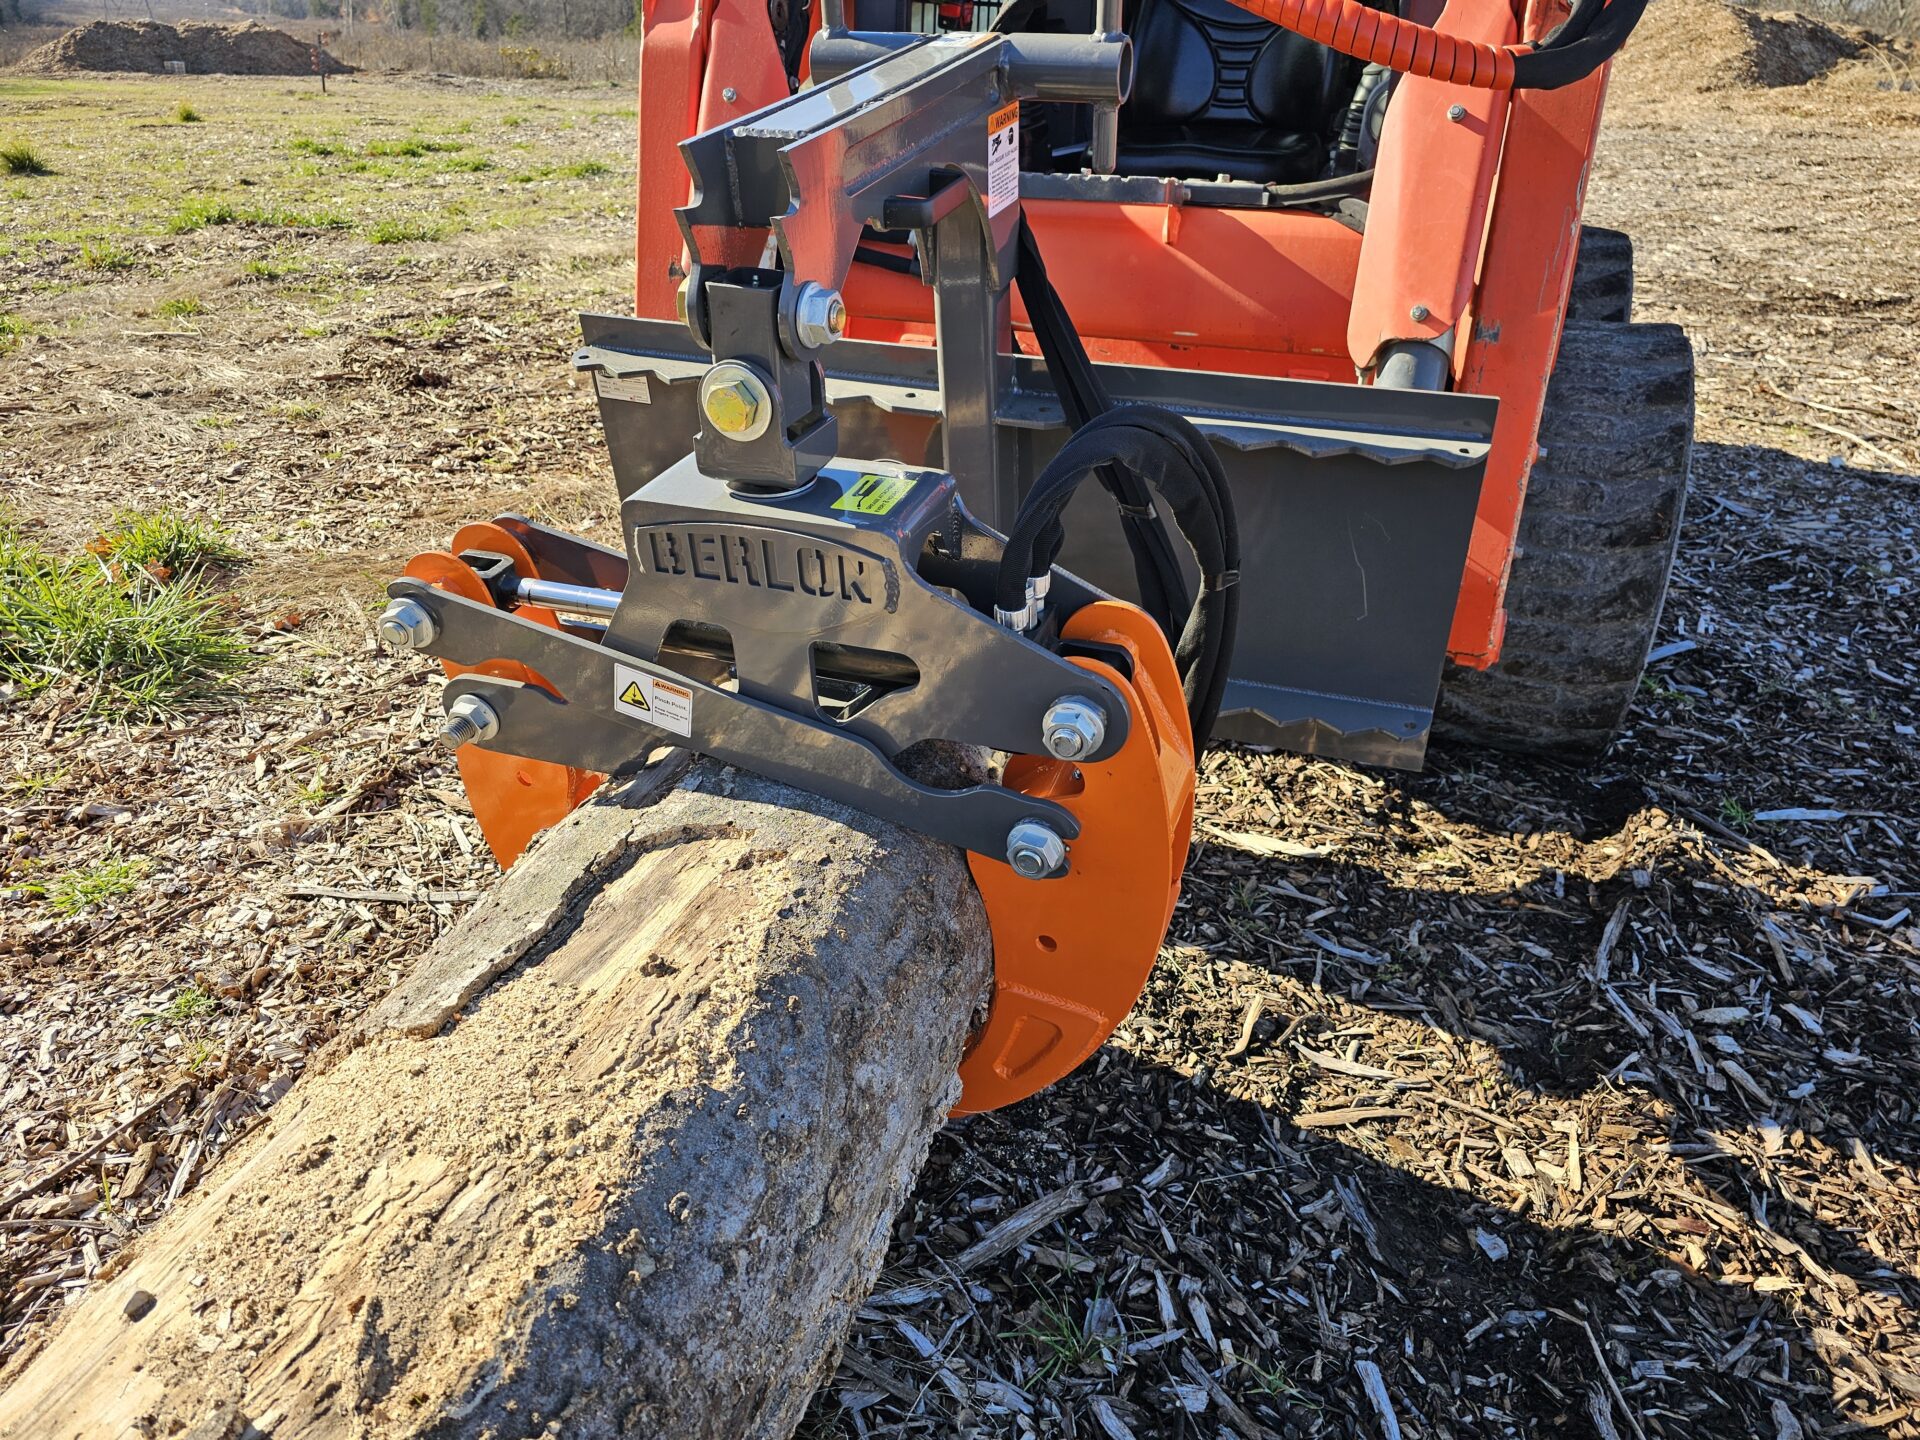 BERLON FORESTRY CLAW FOR SKID STEER